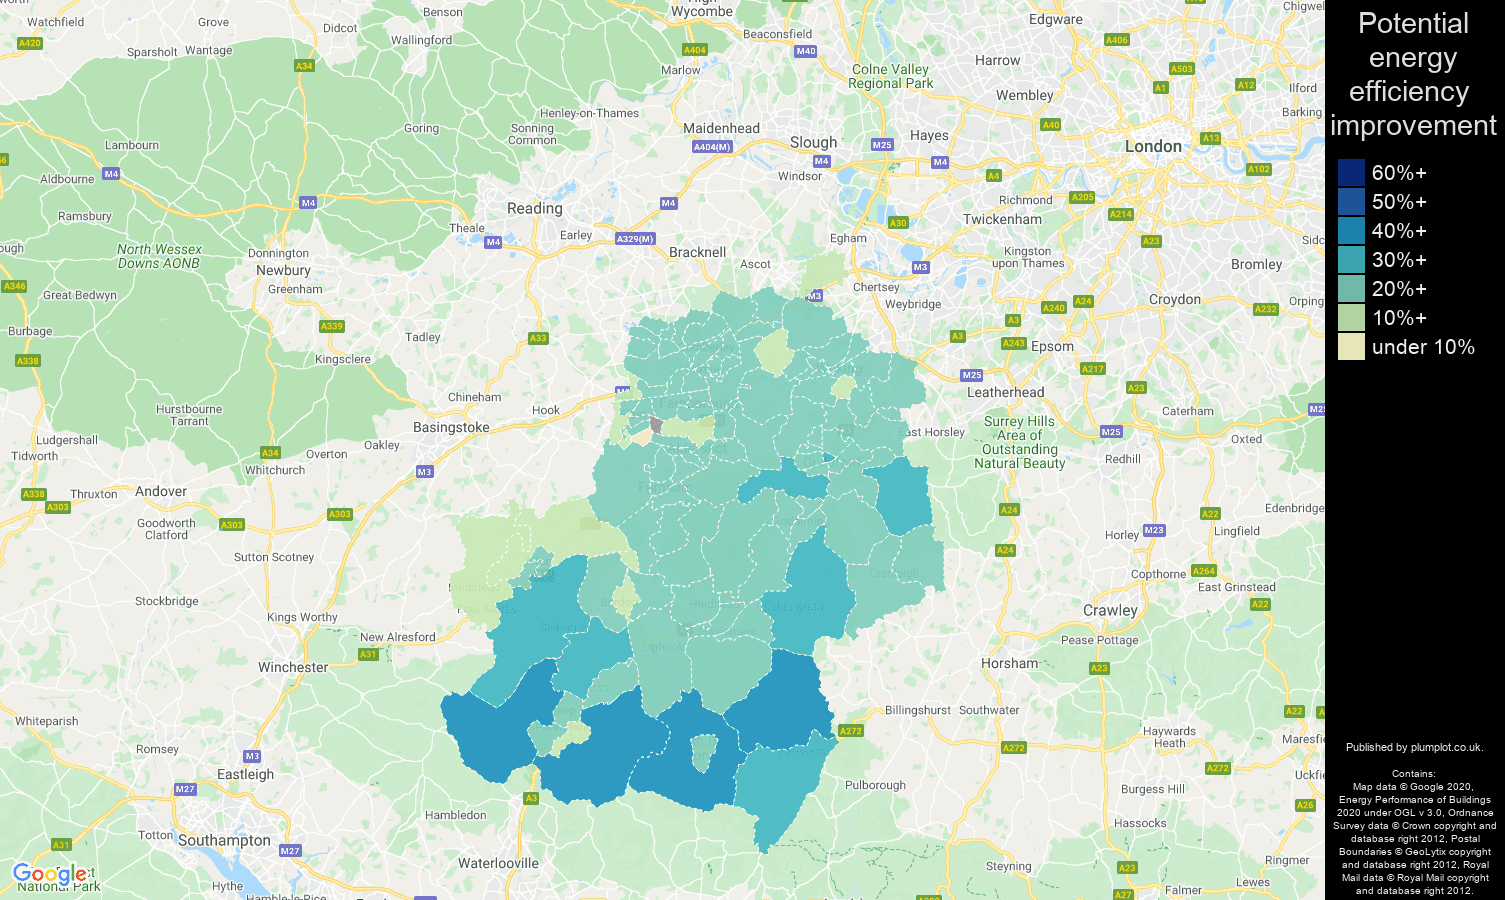 Guildford map of potential energy efficiency improvement of houses